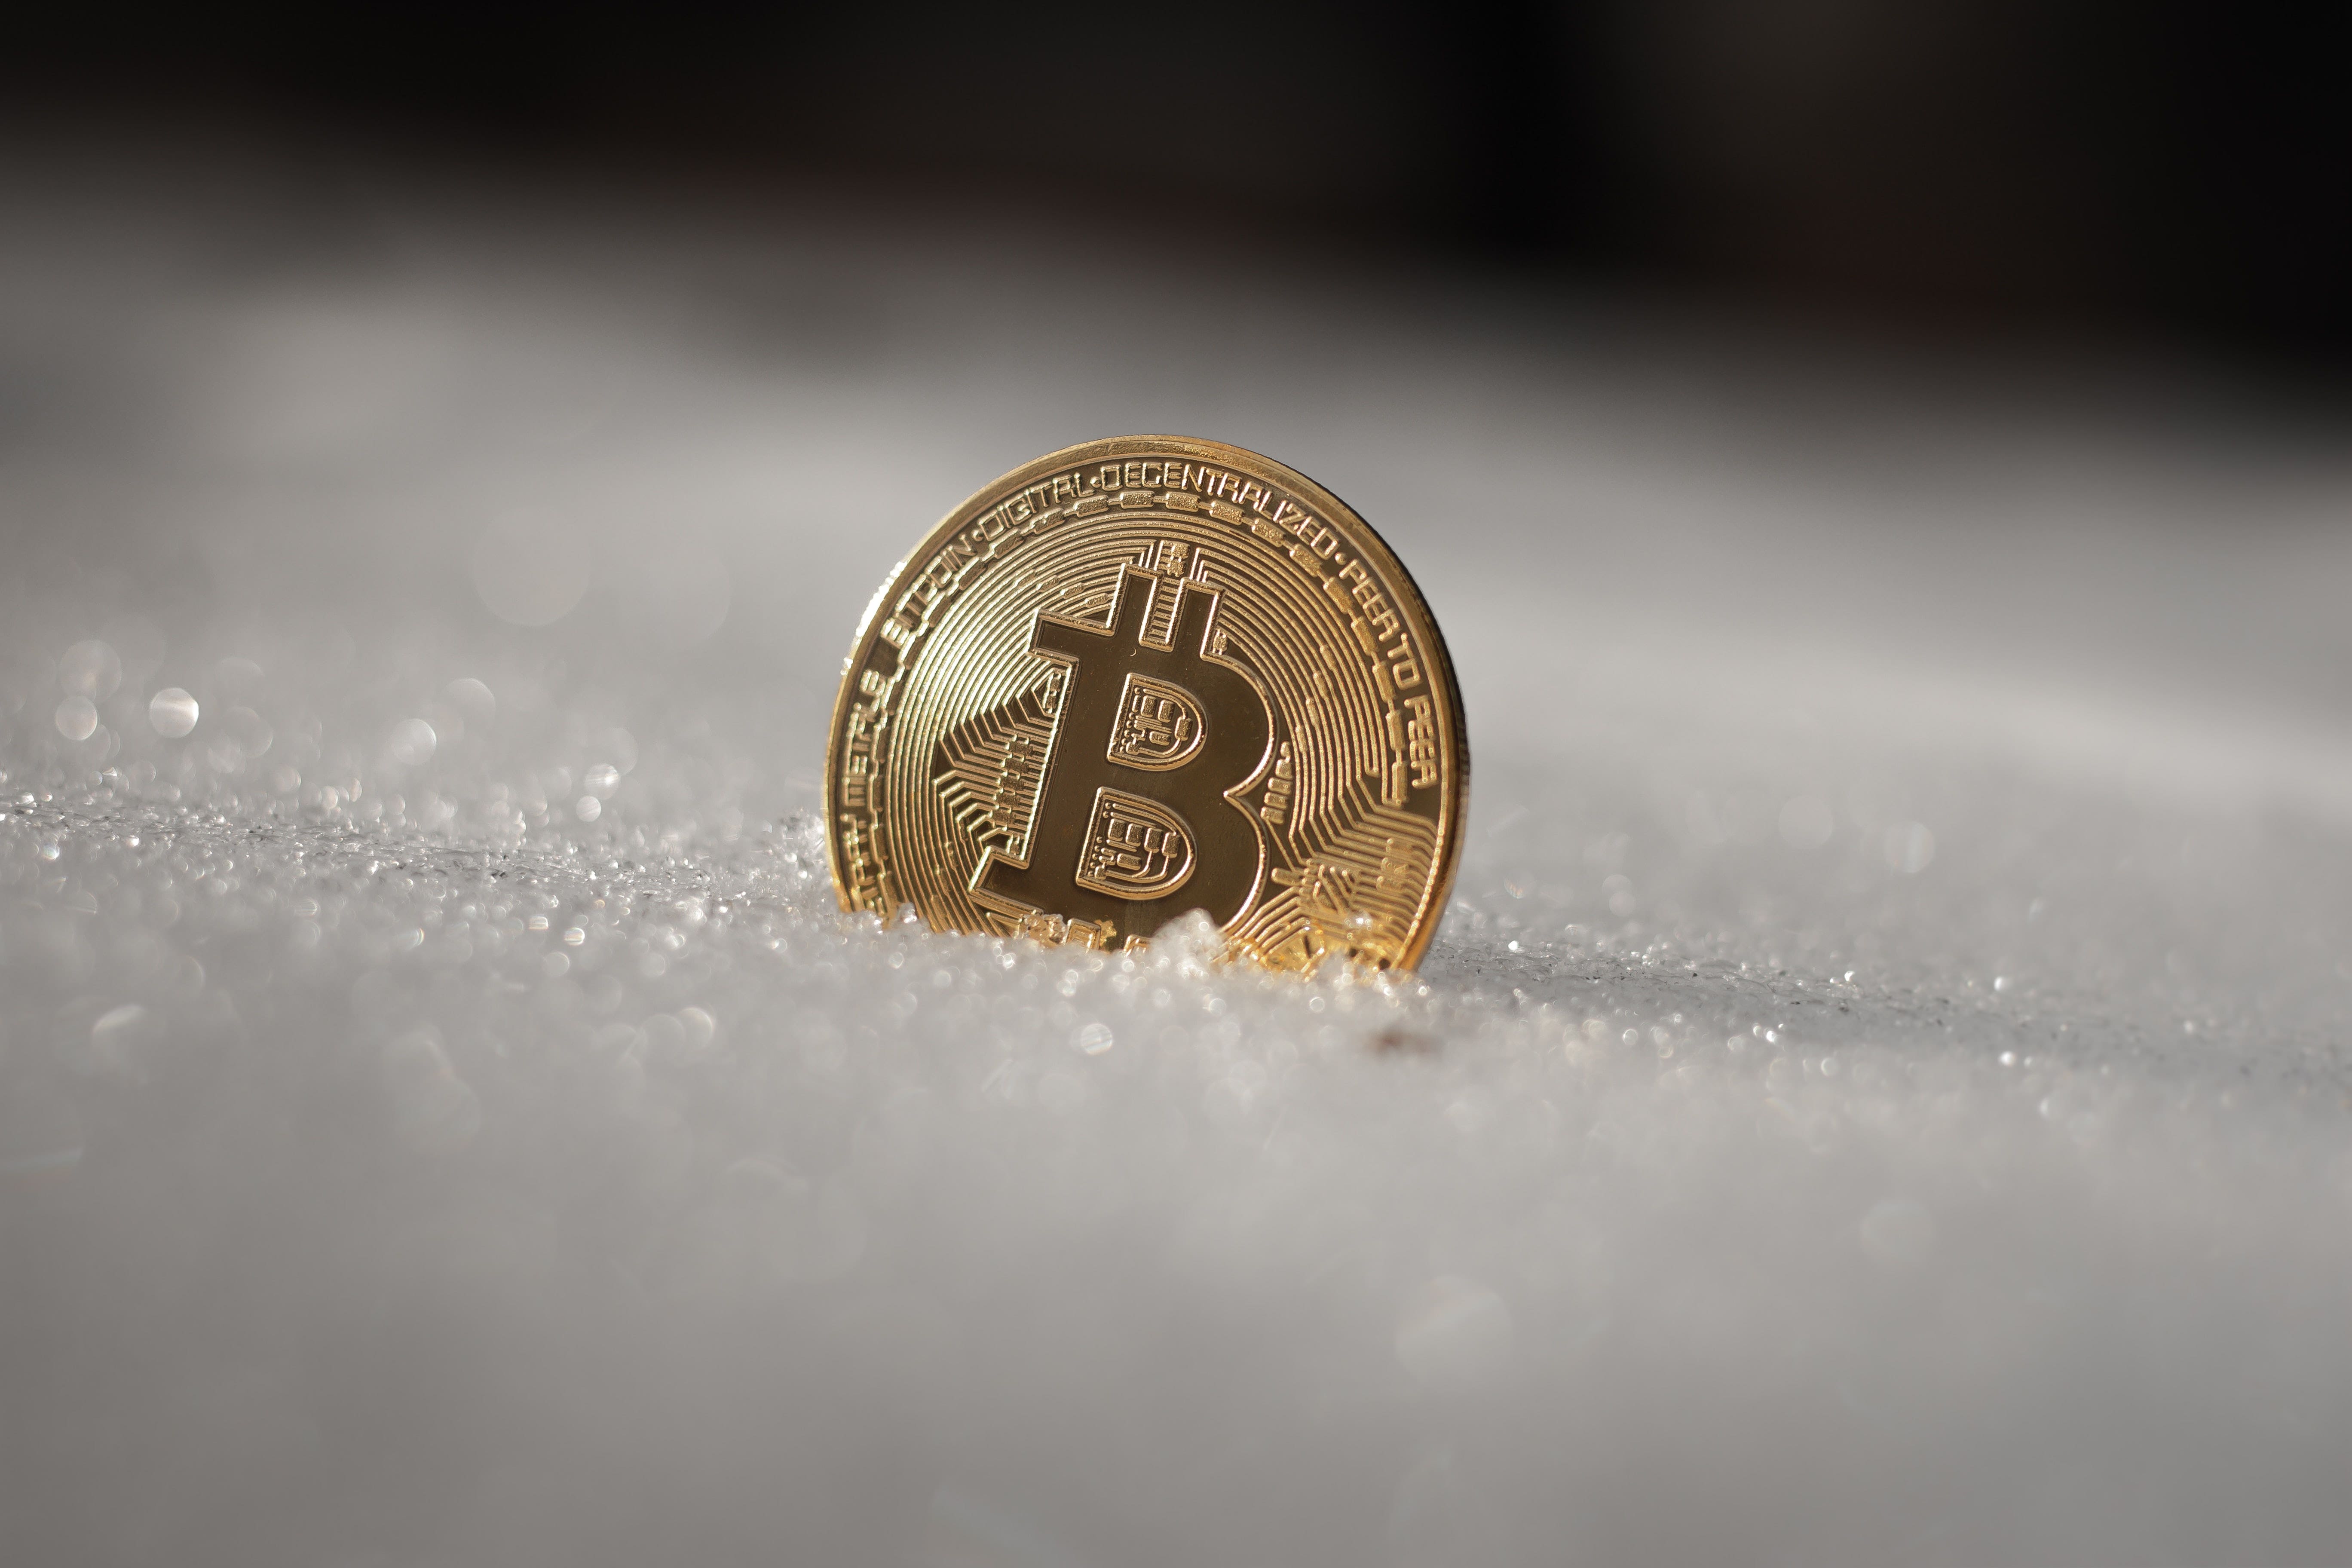 Investors Feeling The Chill Of Long Crypto Winter Ahead, Akin To '1929 Stock Market Crash': Analyst